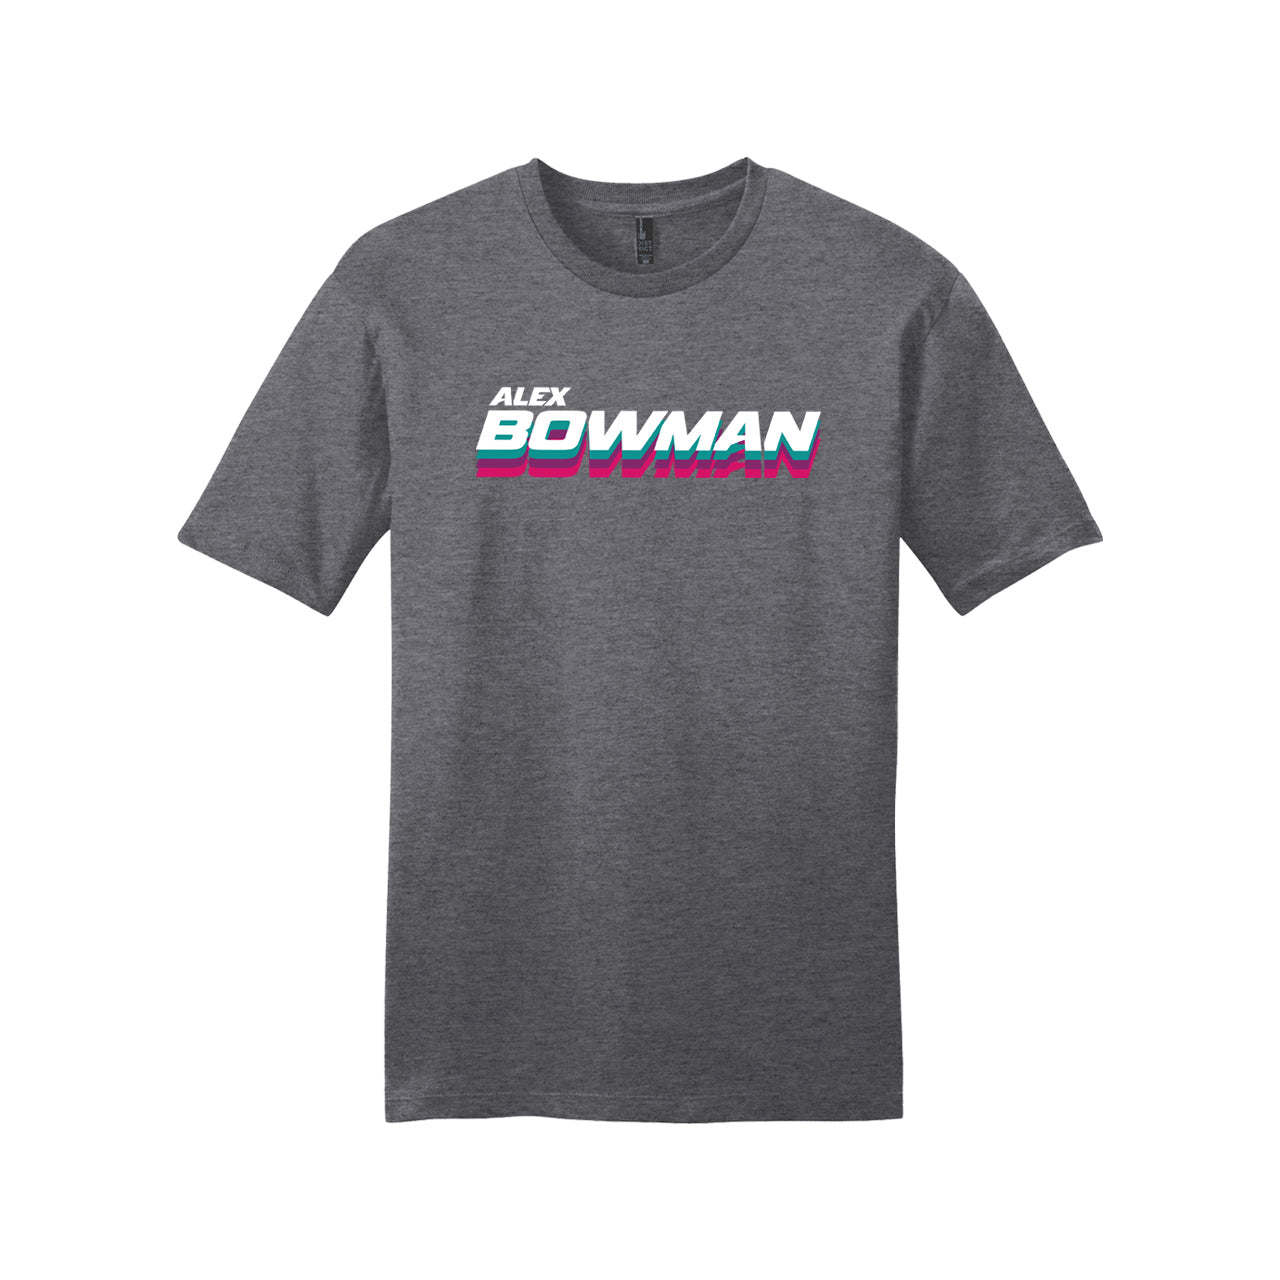 Bowman Repeater T-Shirt - Heather Charcoal